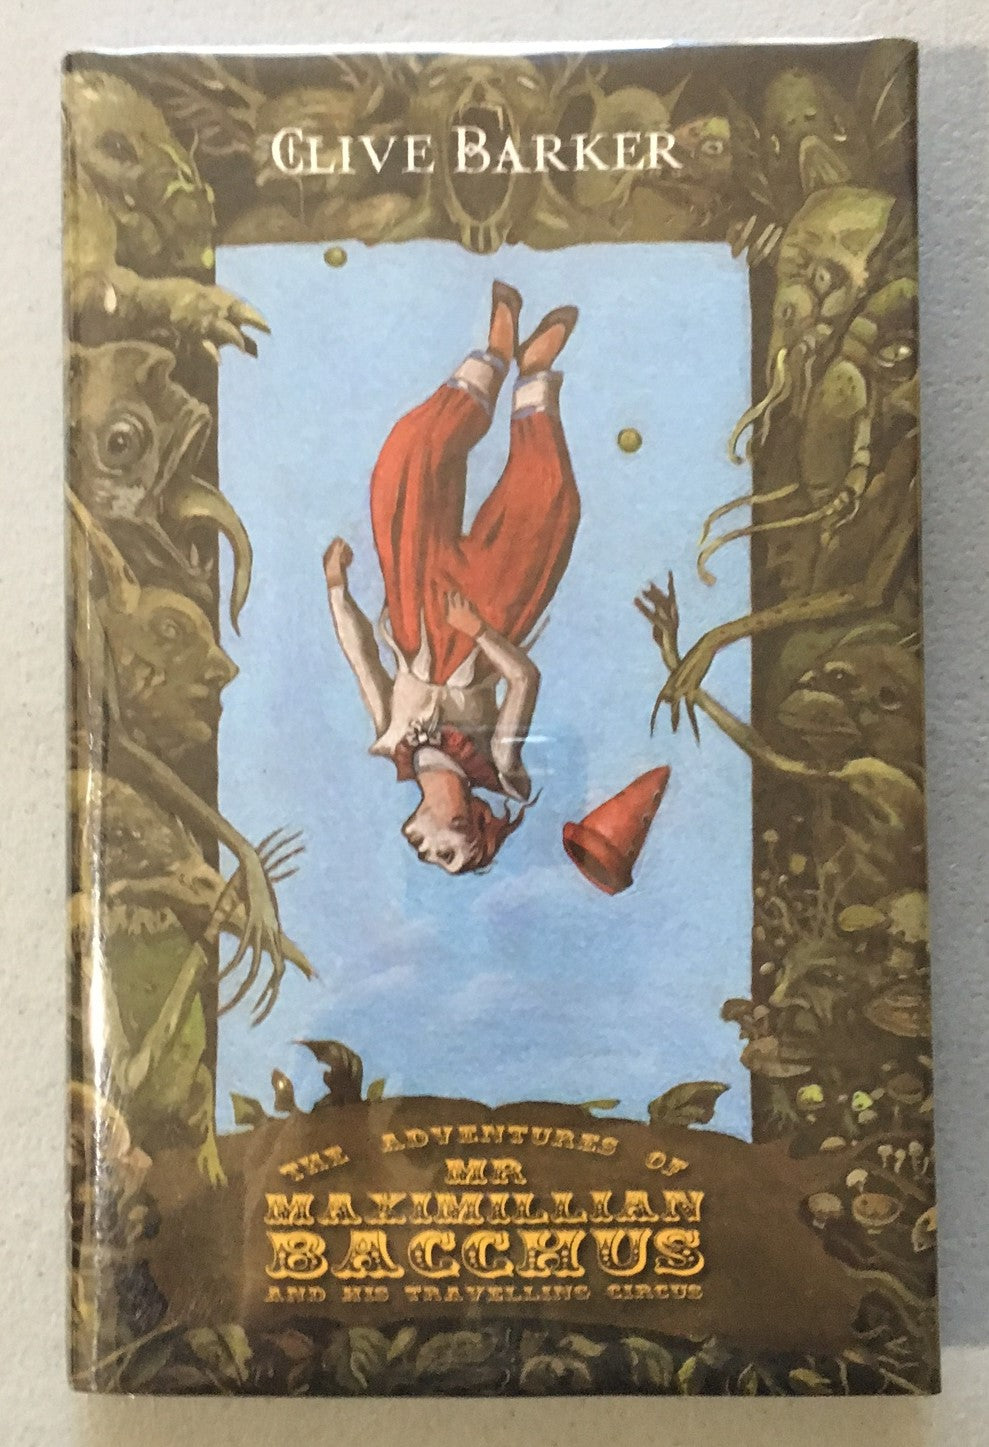 Mr. Maximillian Bacchus and His Travelling Circus by Clive Barker (Signed and Numbered Hardcover)